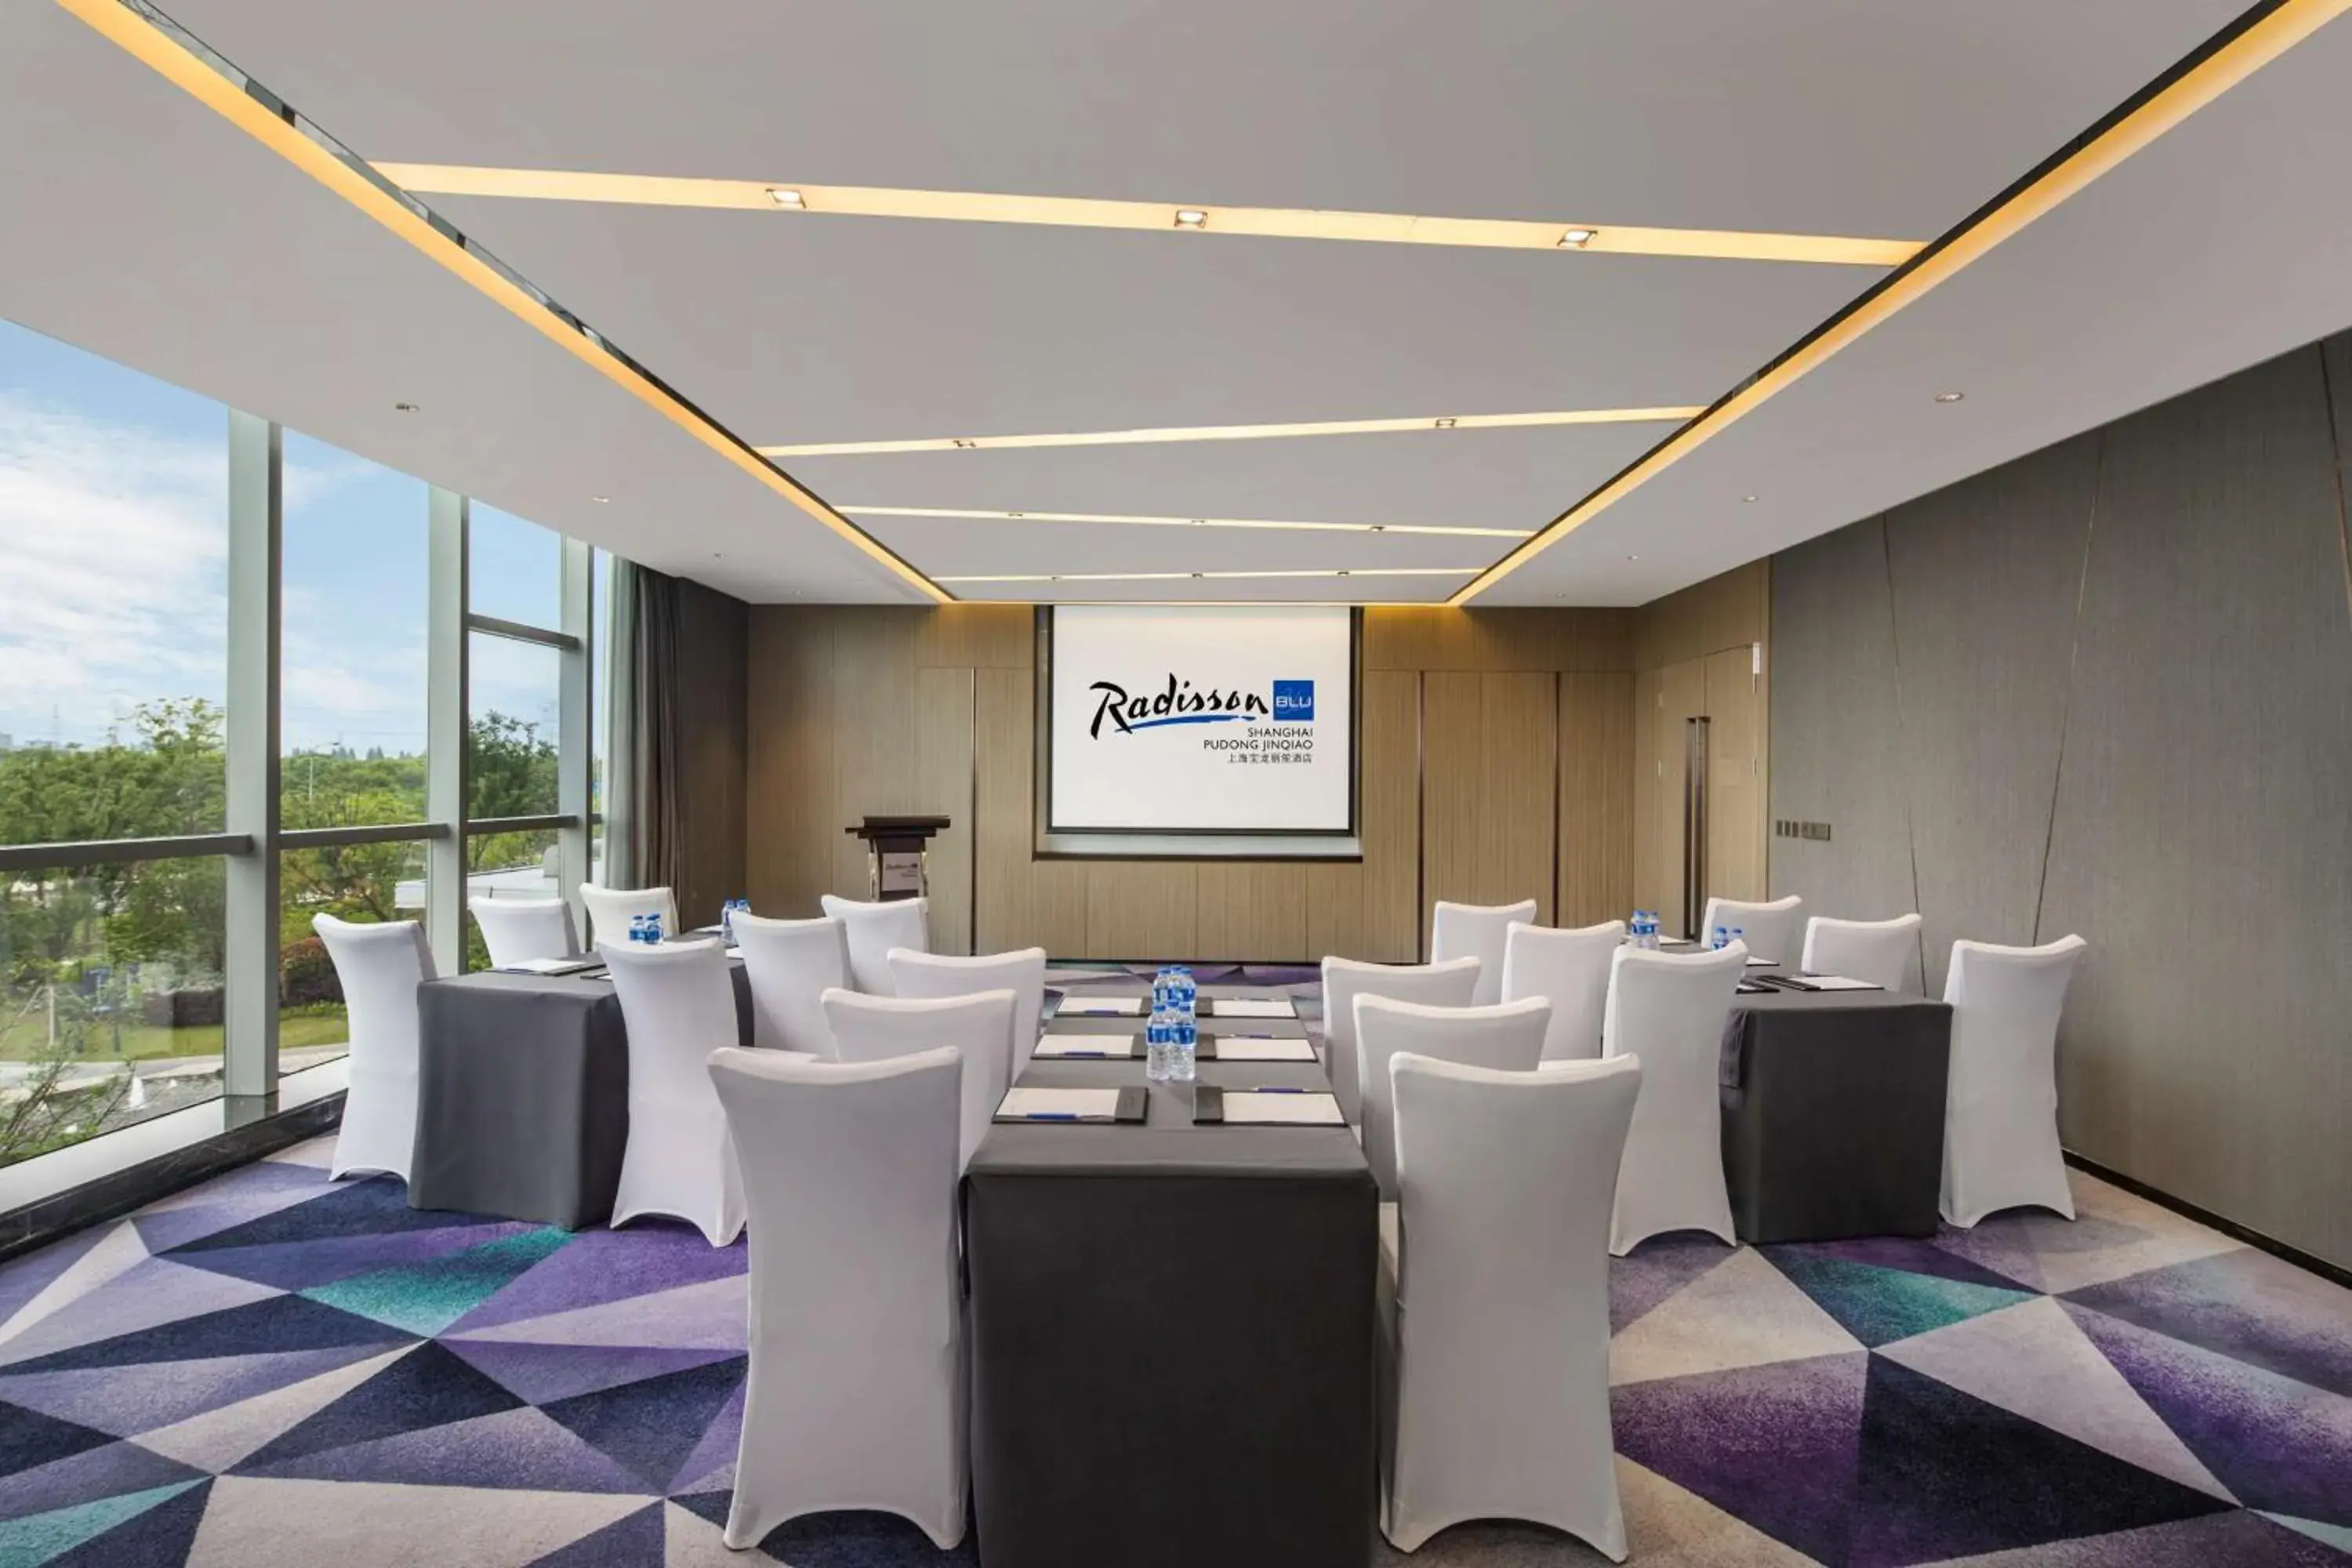 On site in Radisson Blu Shanghai Pudong Jinqiao